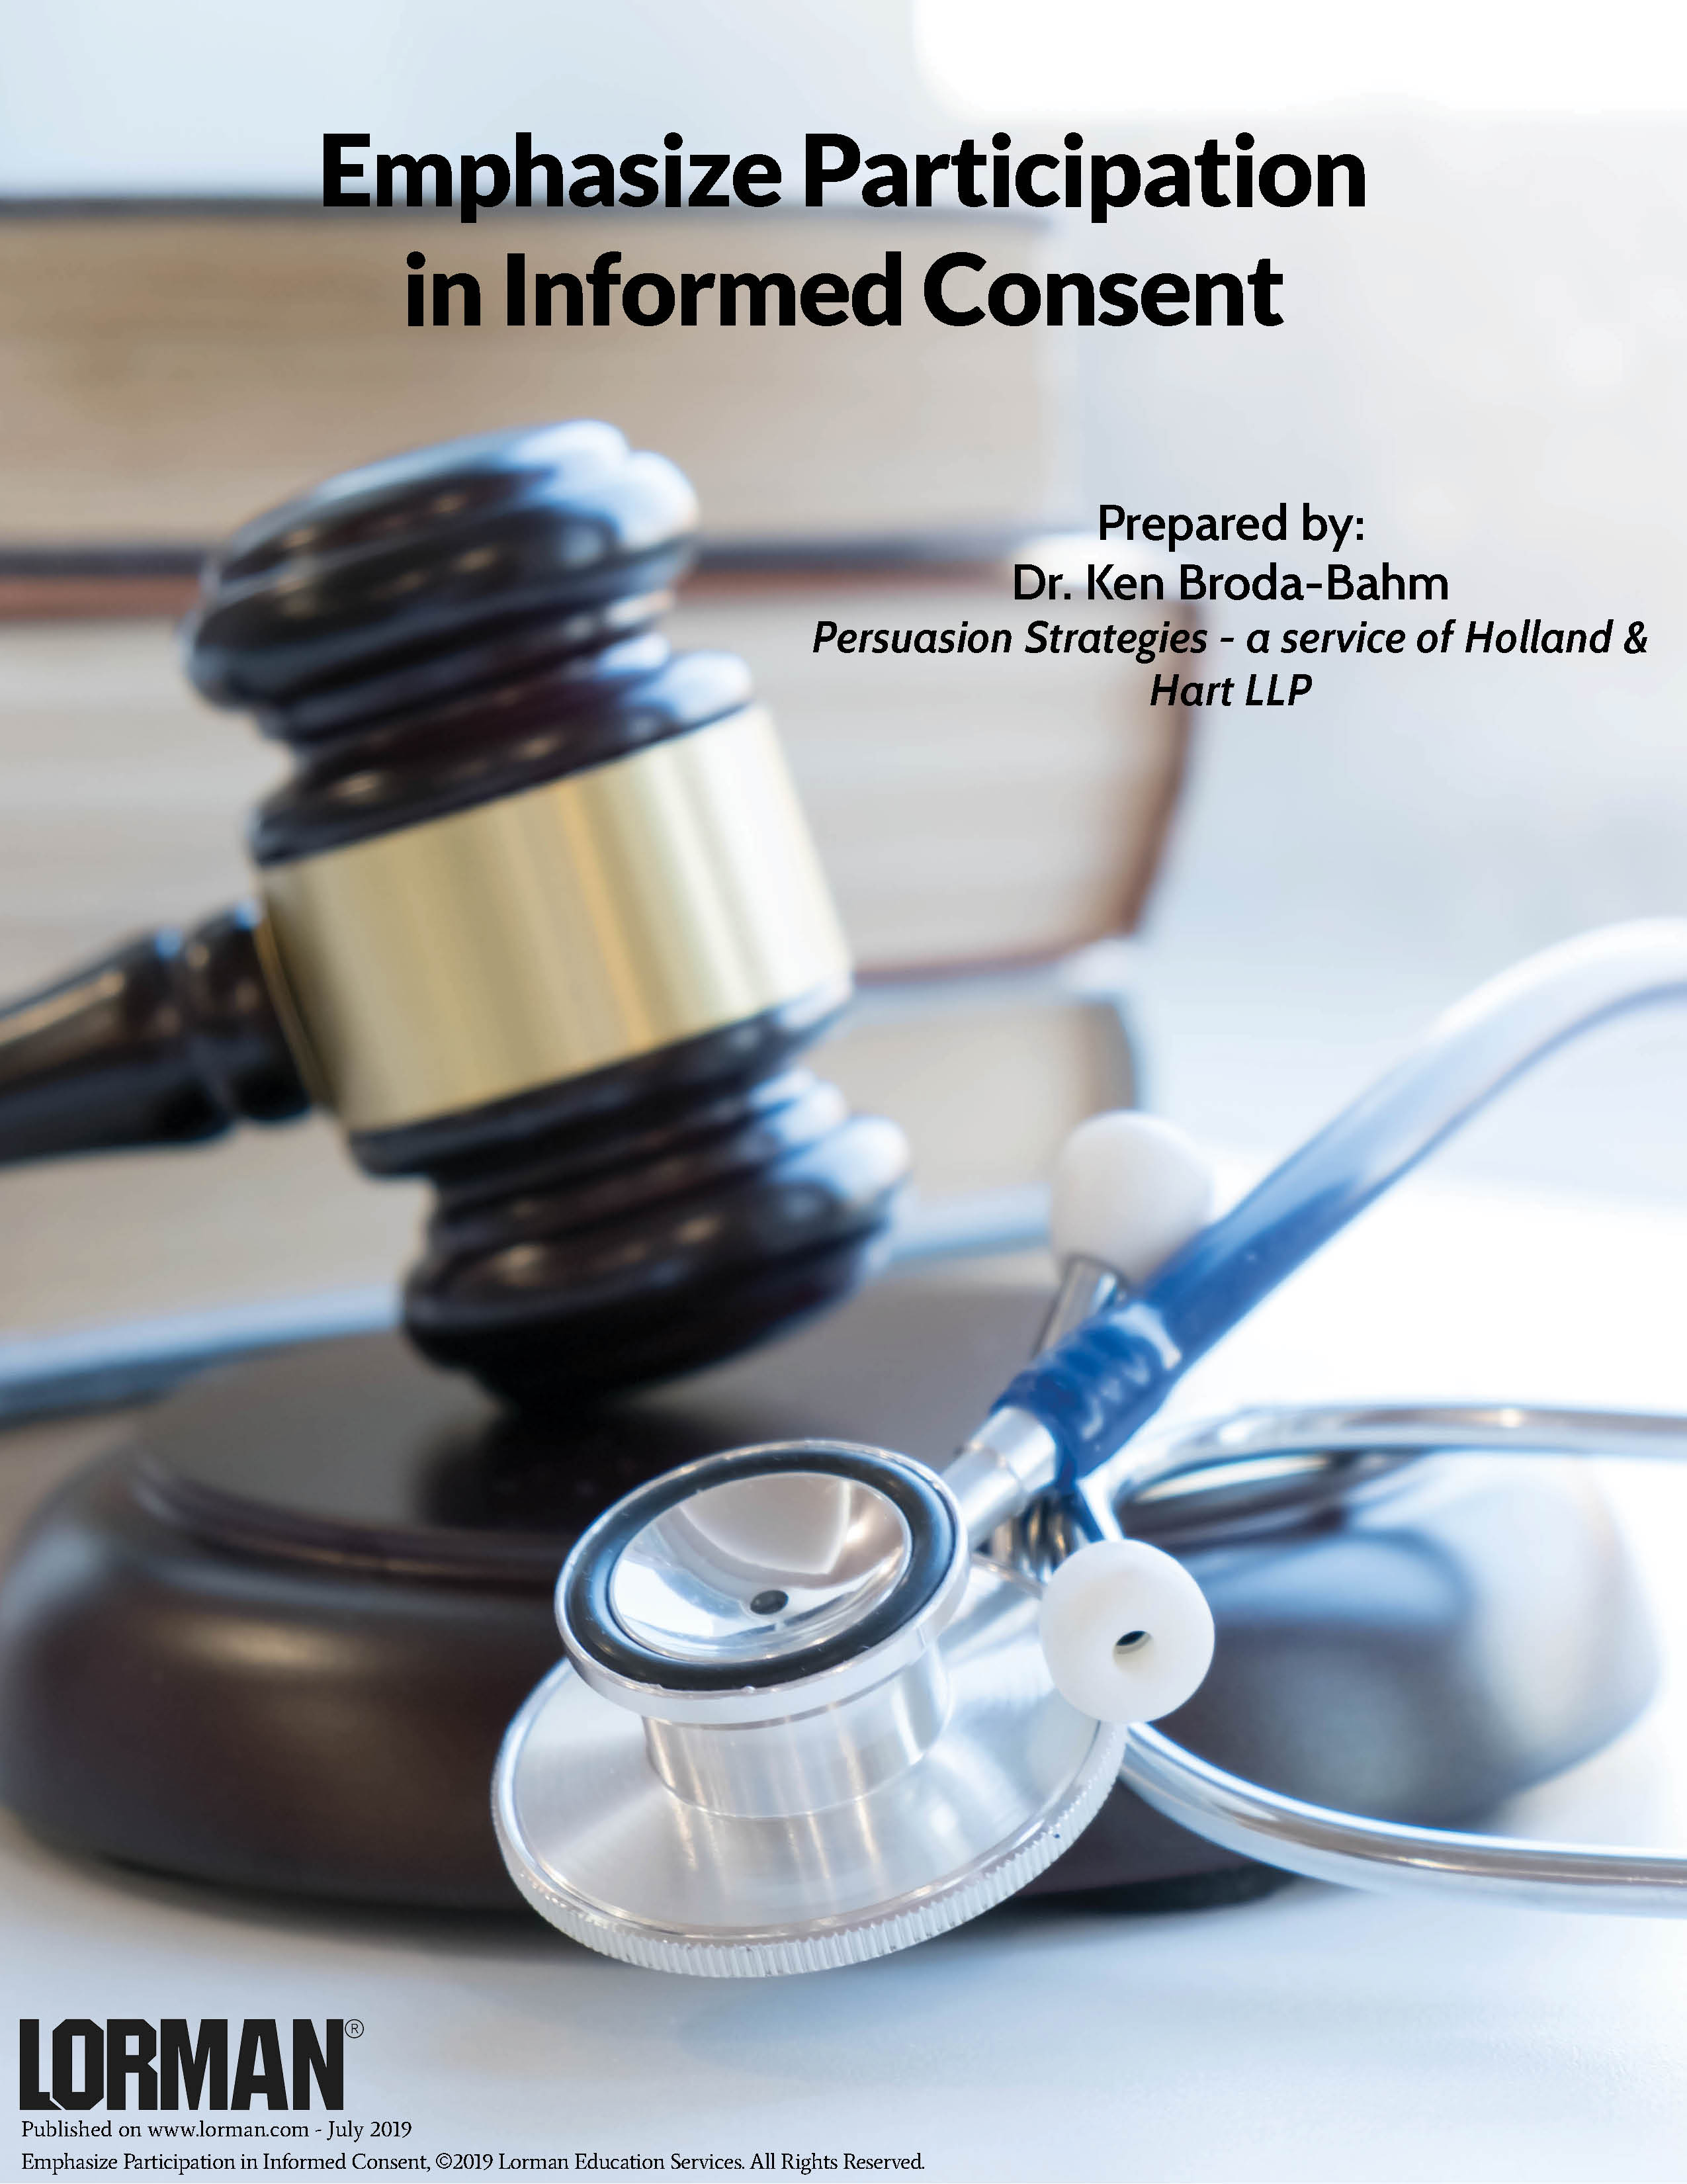 Emphasize Participation in Informed Consent